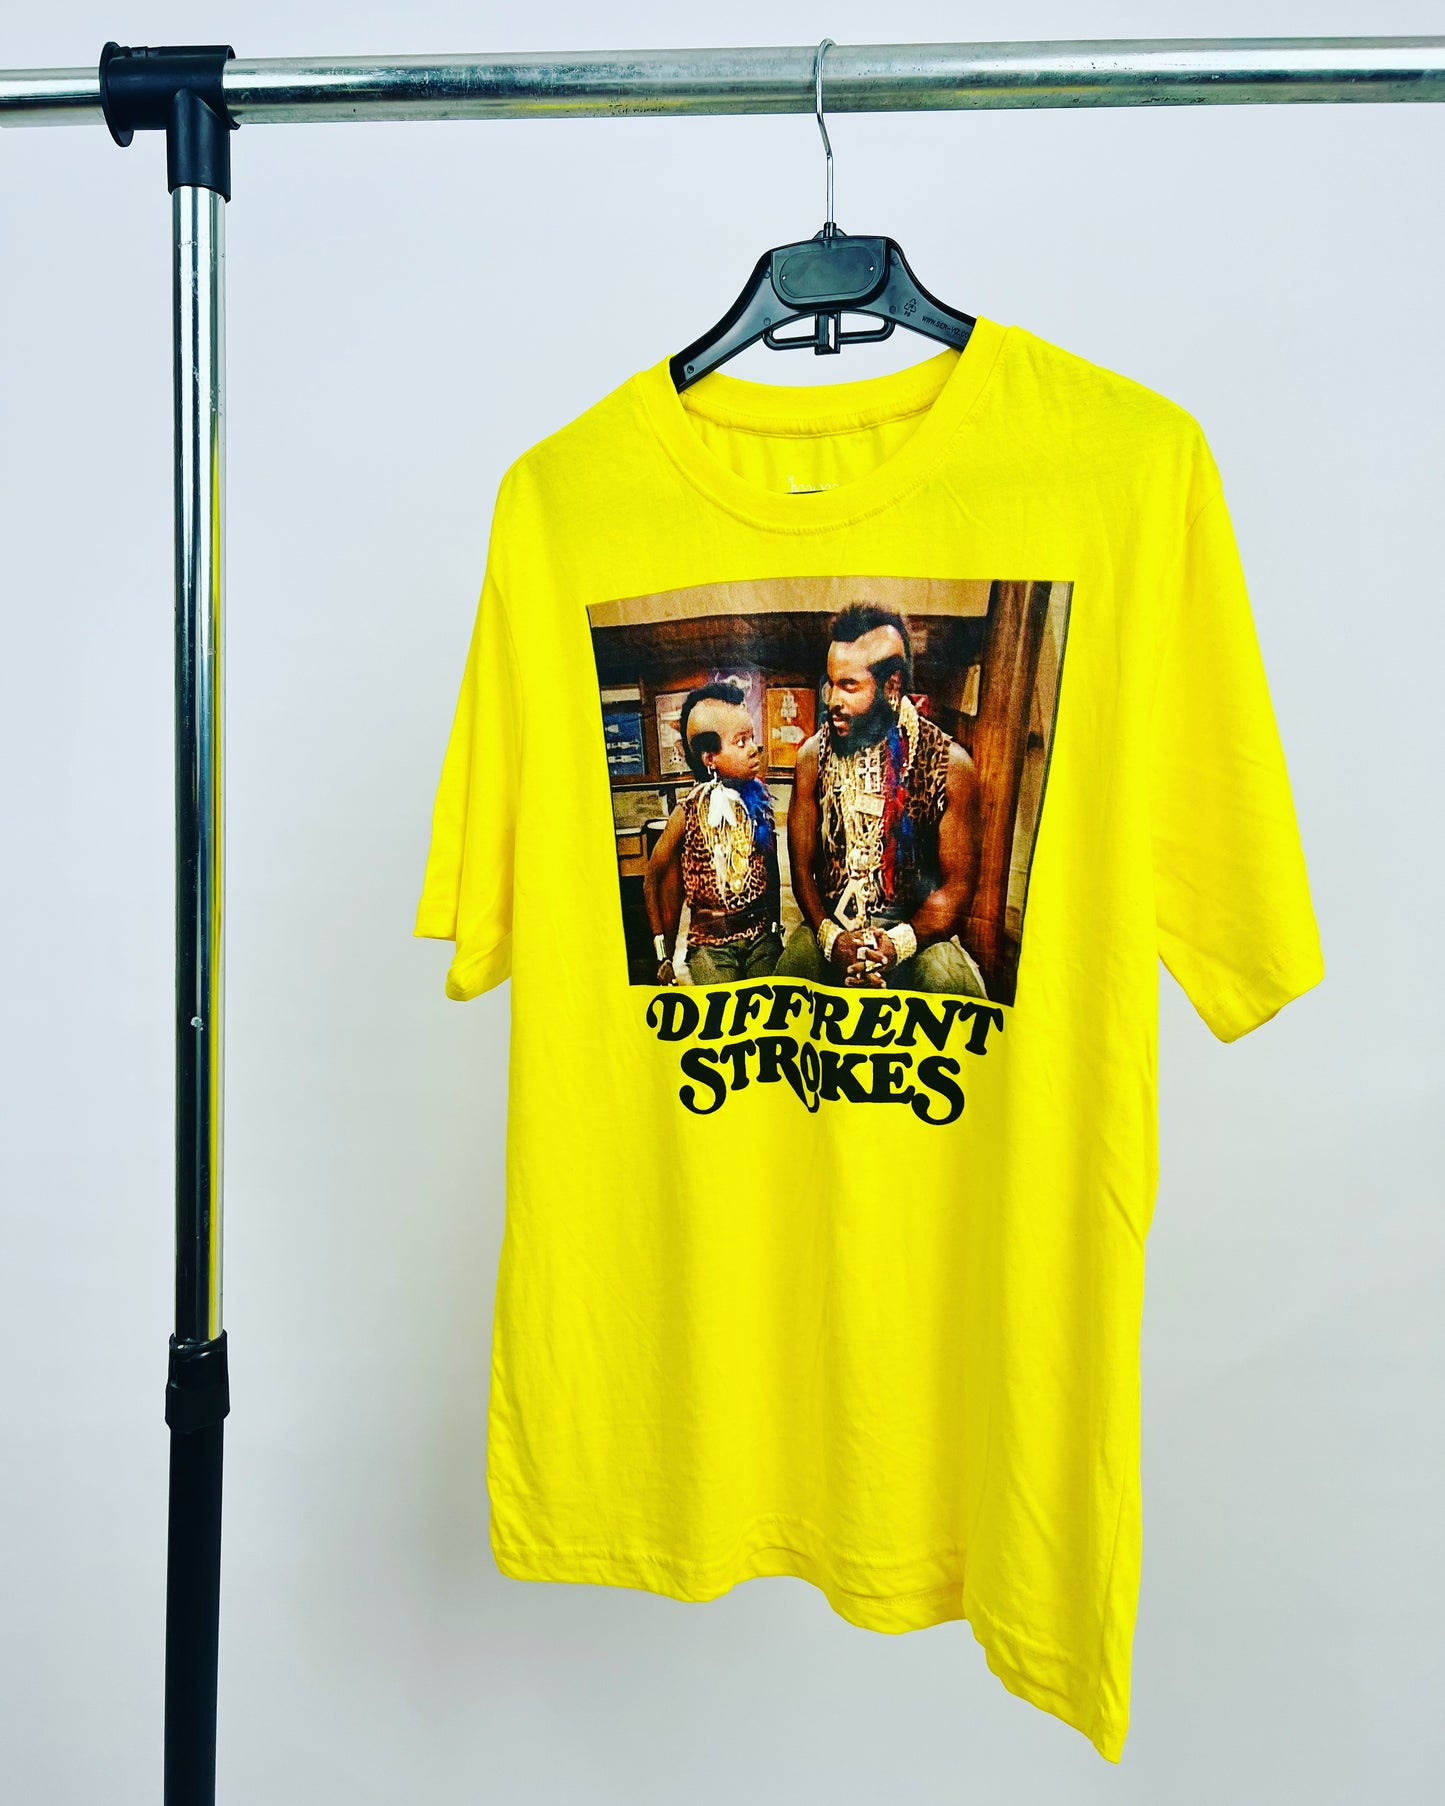 Different Strokes print T-shirt in yellow